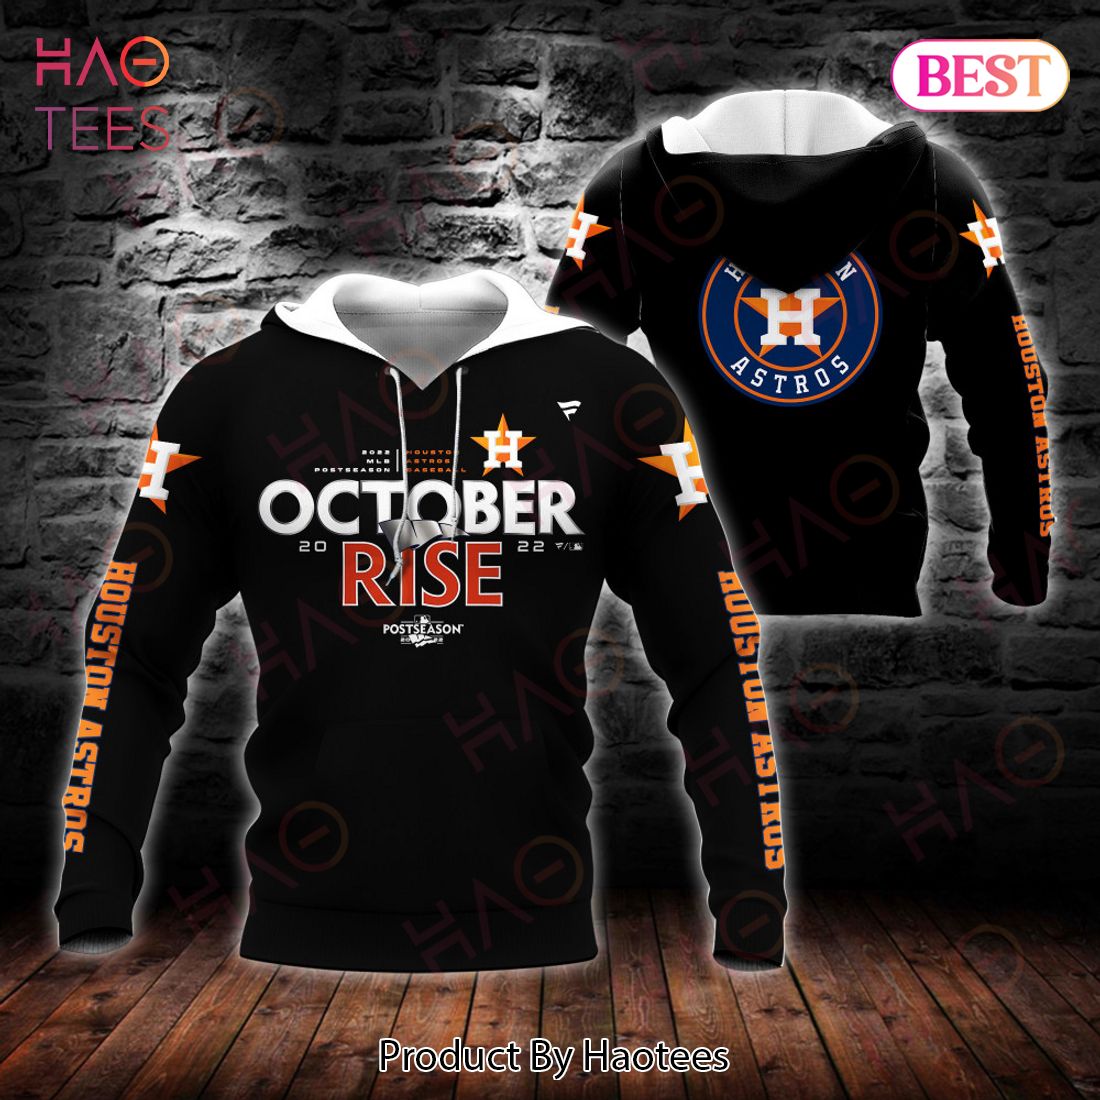 3D Printed All Over Houston Astros Shirt Limited Edition